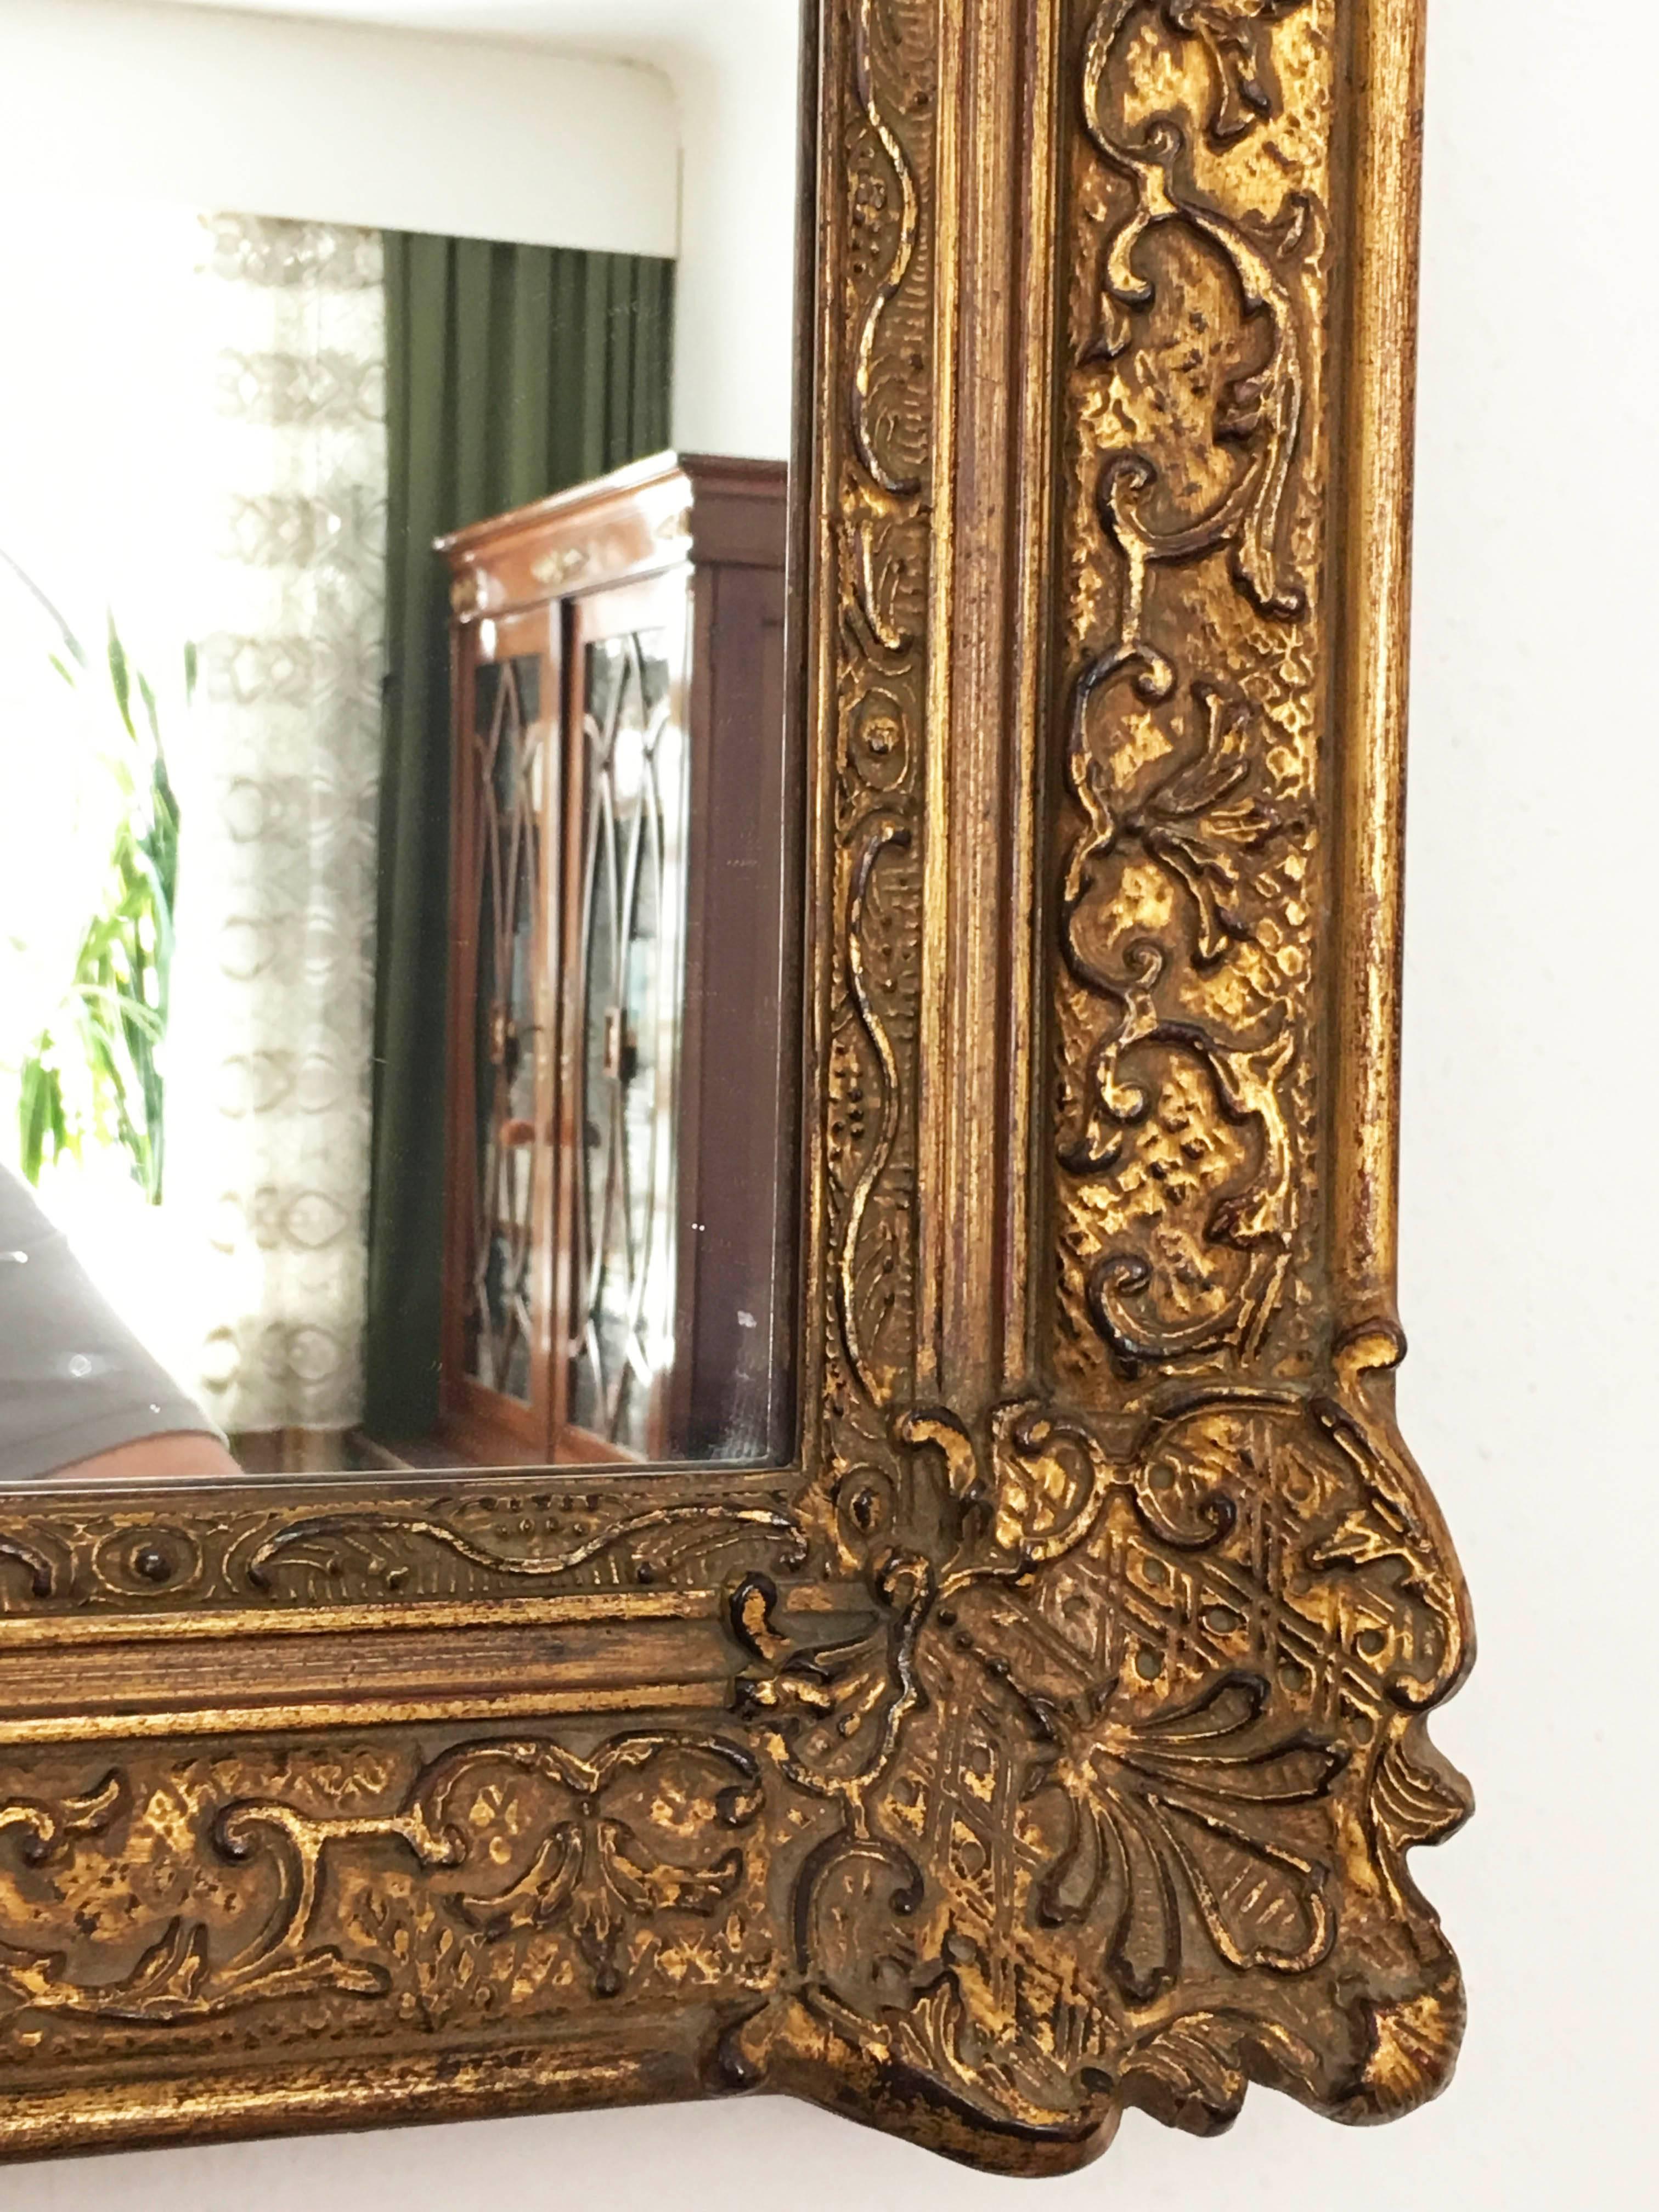 Made in early 20th in Baroque style giltwood carved mirror, the shaped frame carved with floral motifs, leaves, flowers. Water gilding of polished and matte quality, with some bleeding of the bole, the mirror plate recent replacement.